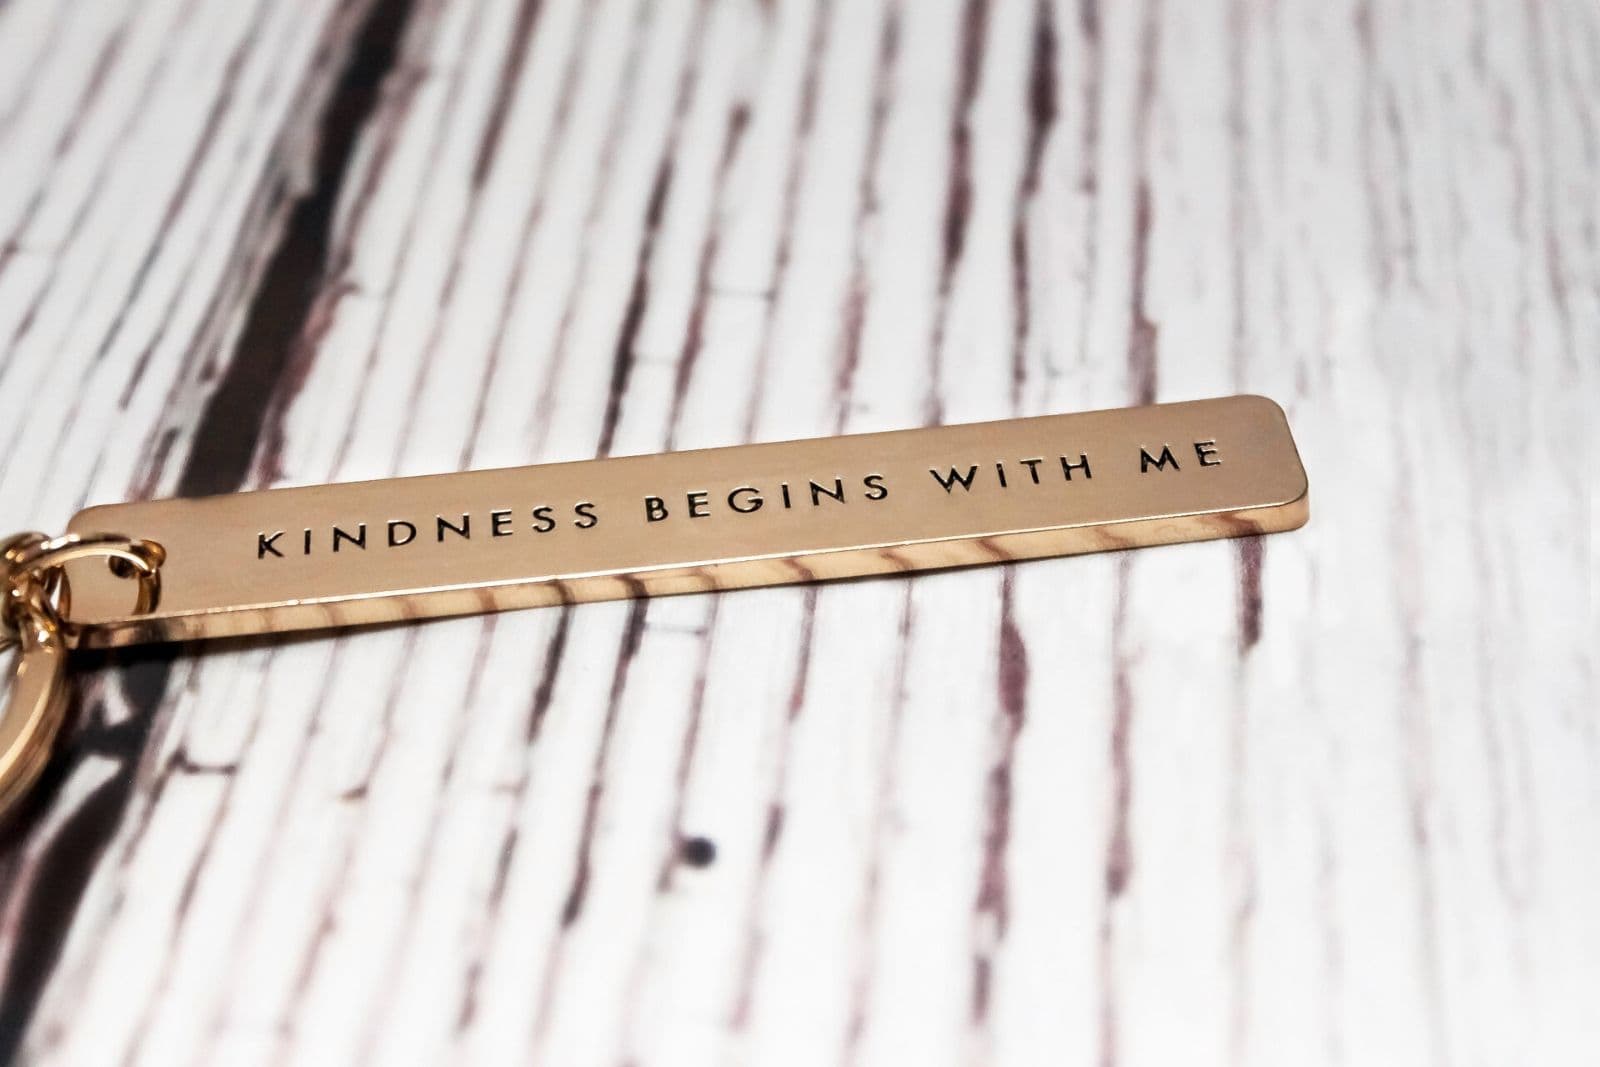 Rose gold keychain that says "kindness begins with me" on a white wood background.